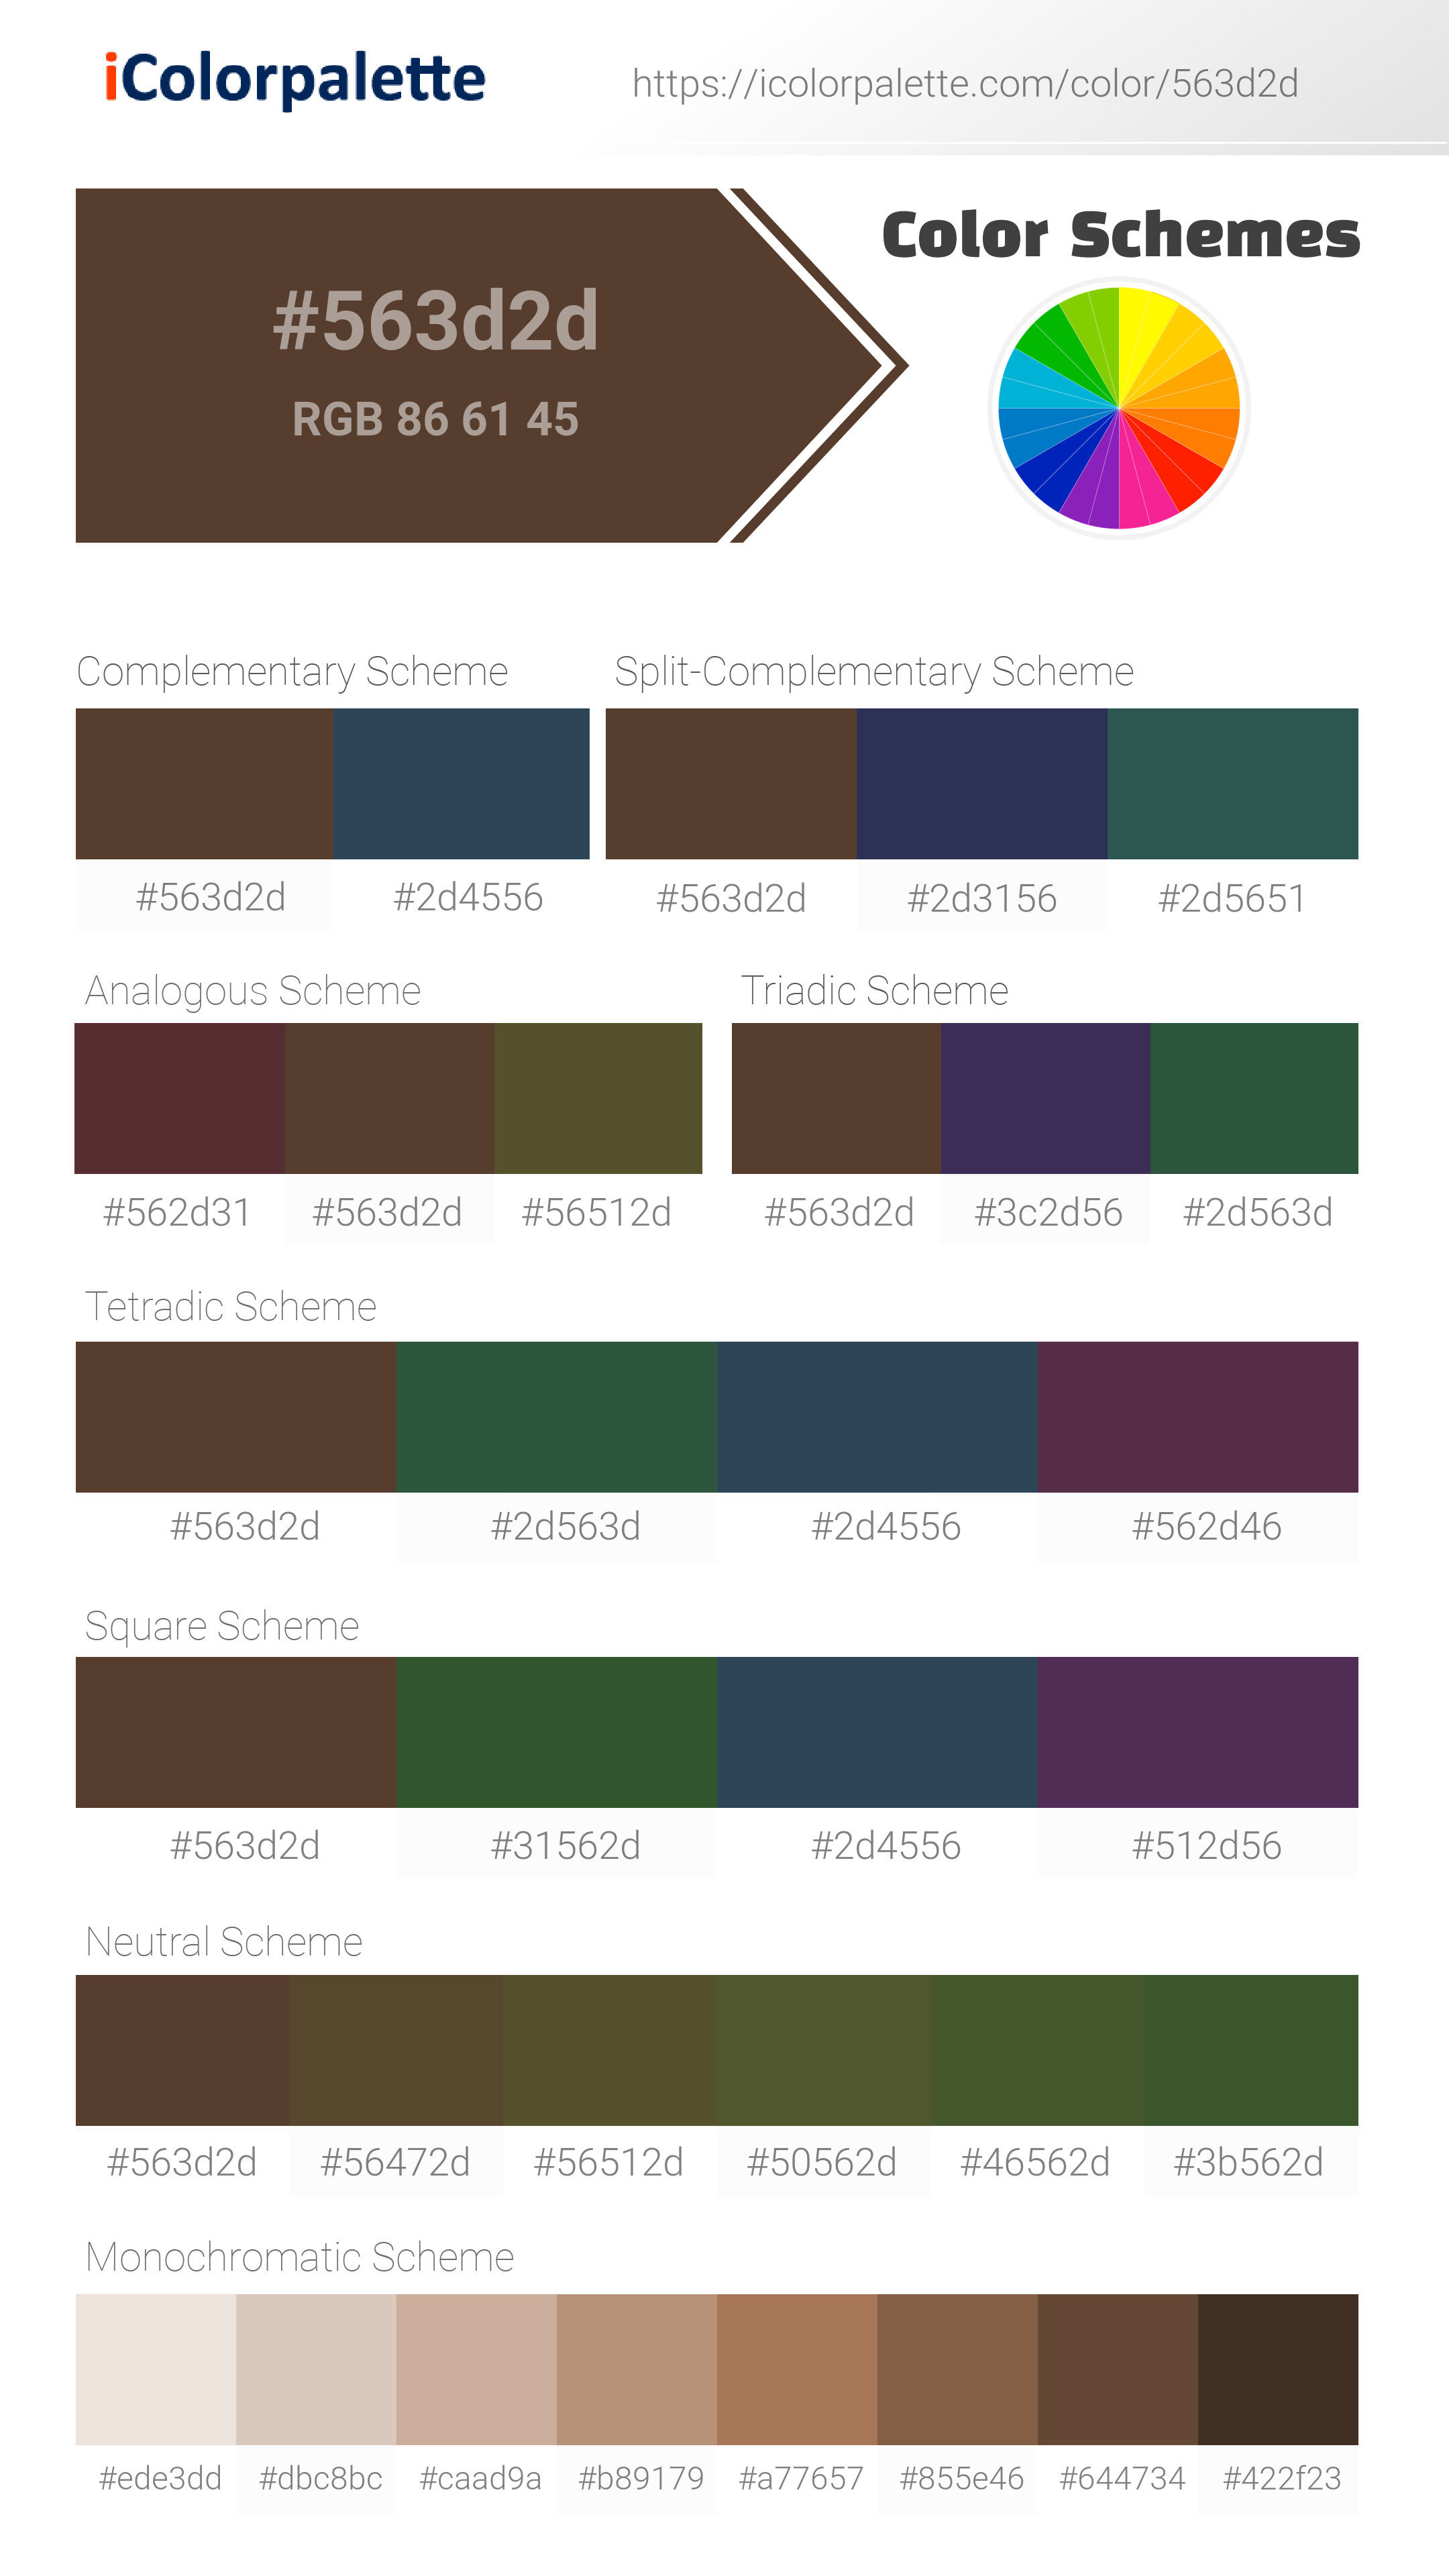 Shades Of Brown: +50 Brown Colors with Hex Codes